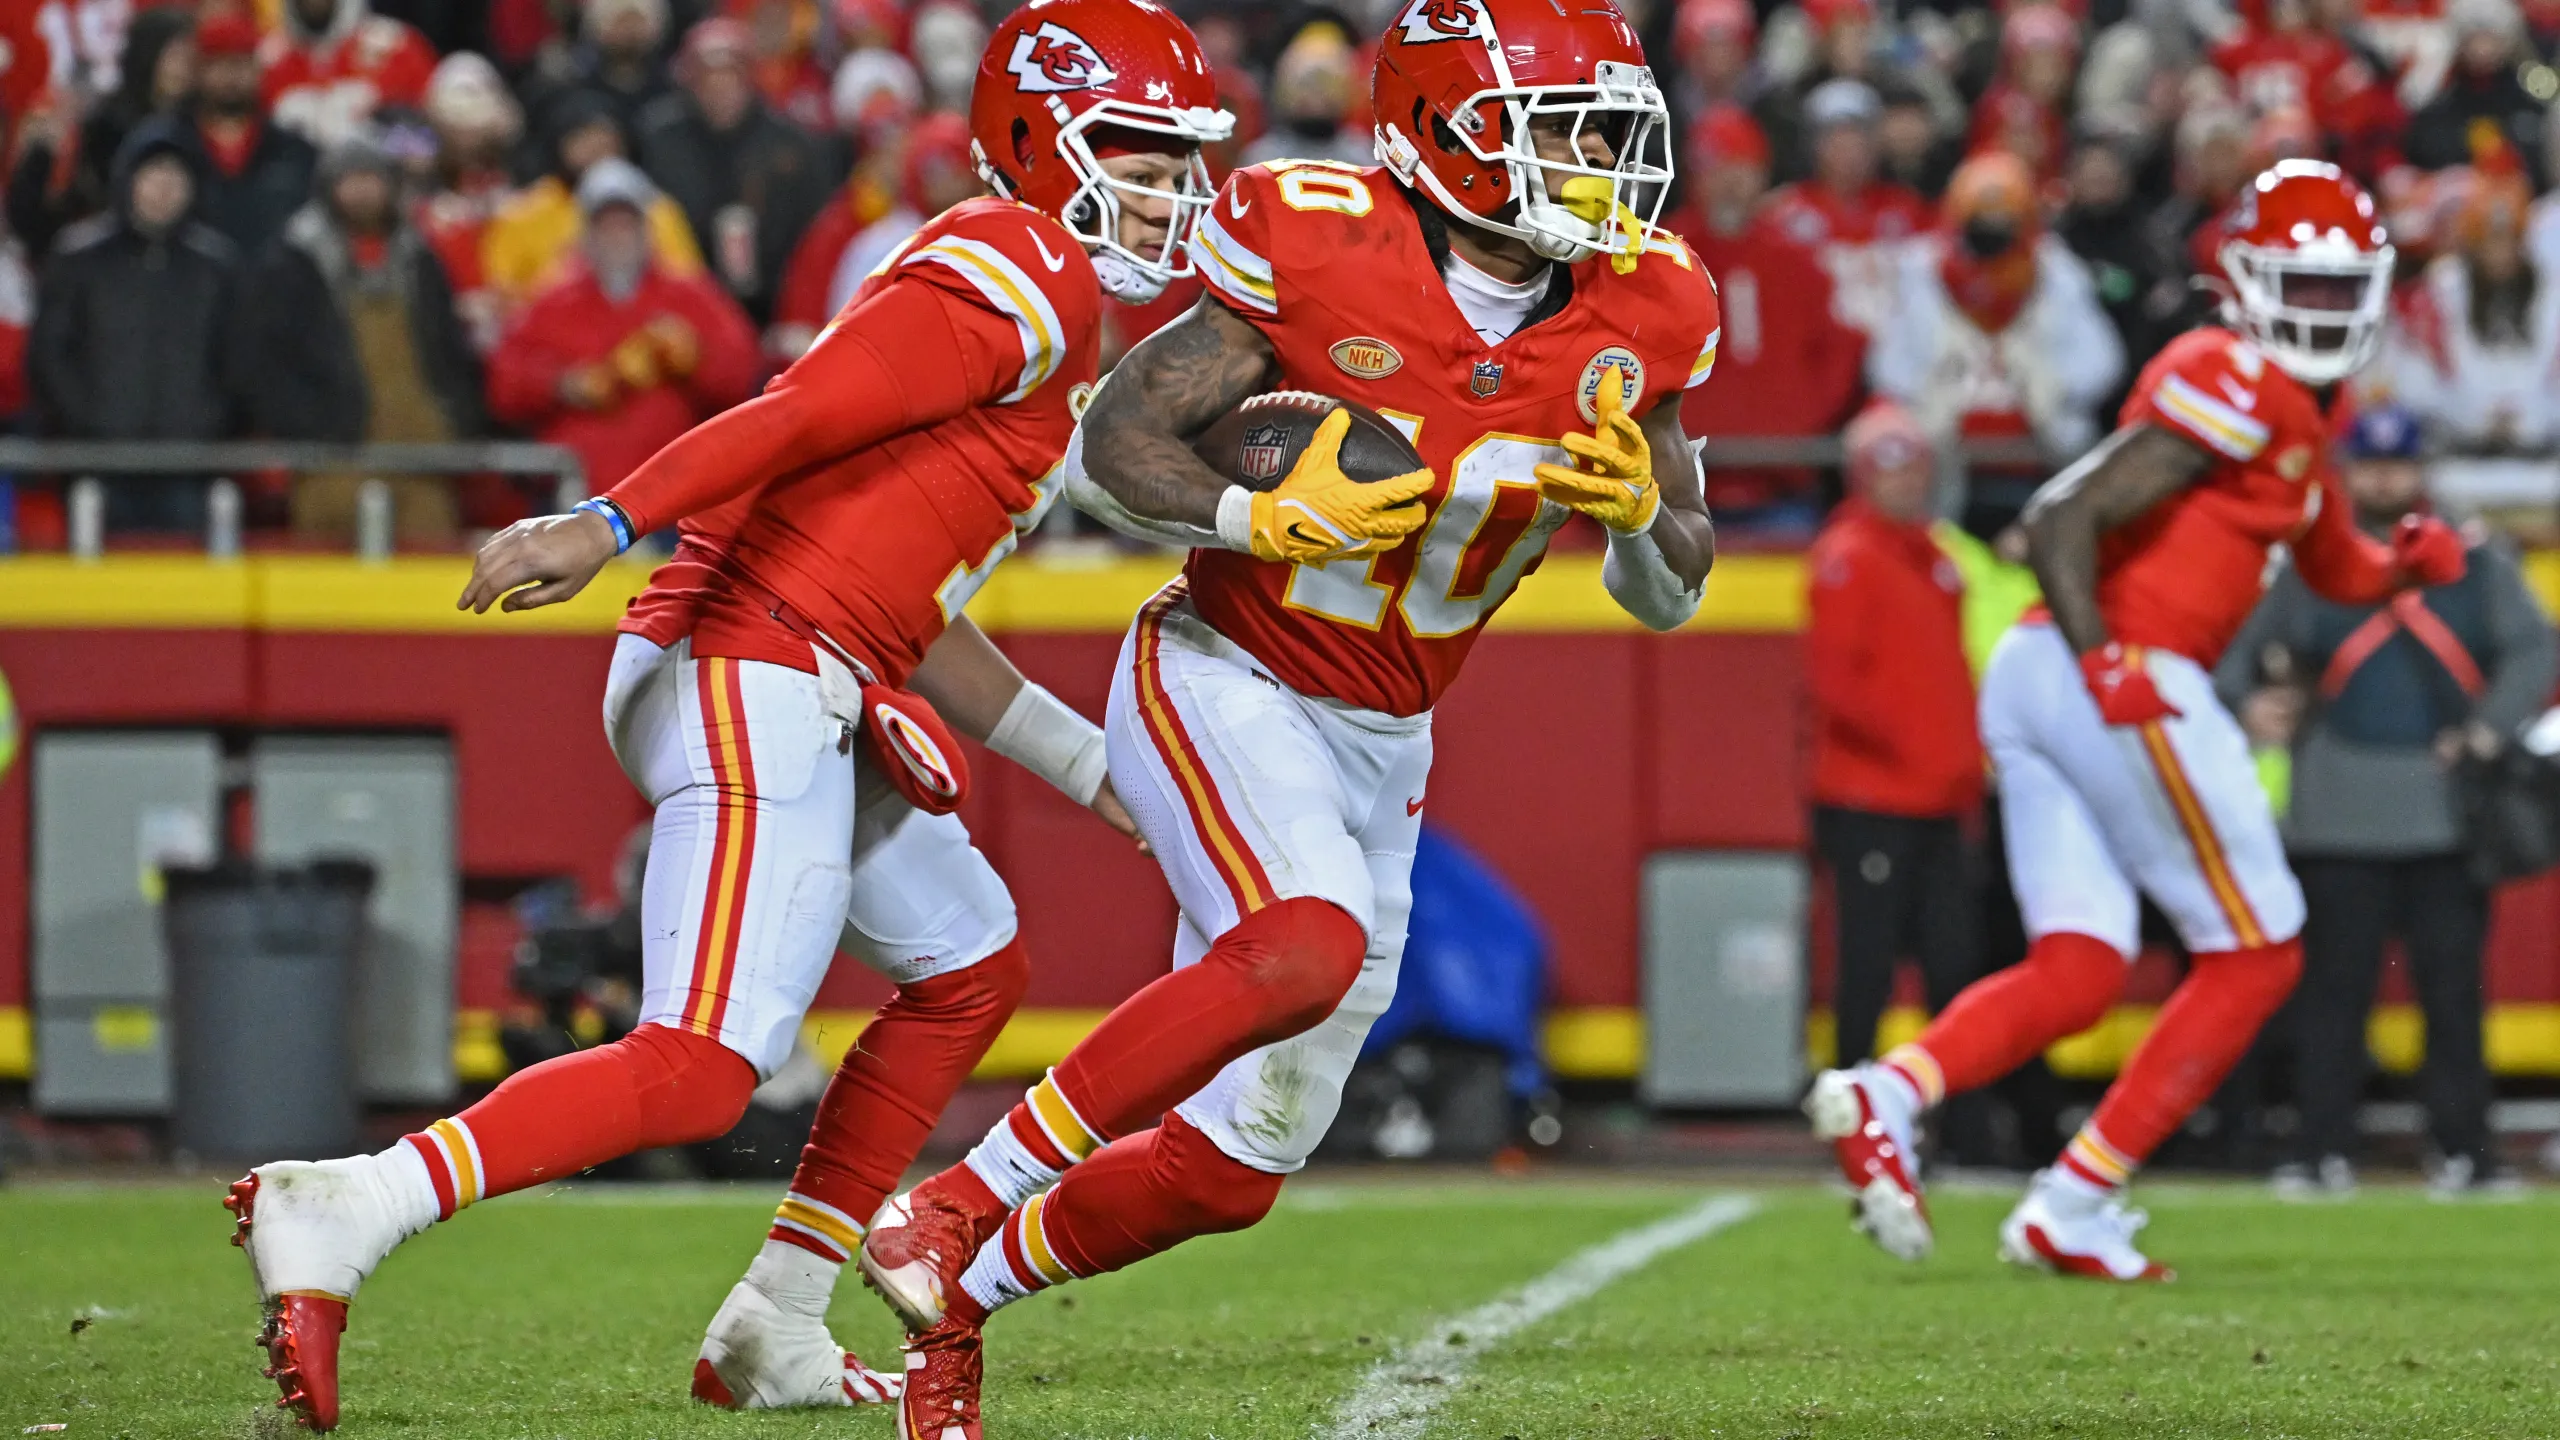 NFL News Kansas City Chiefs, under the leadership of Andy Reid and